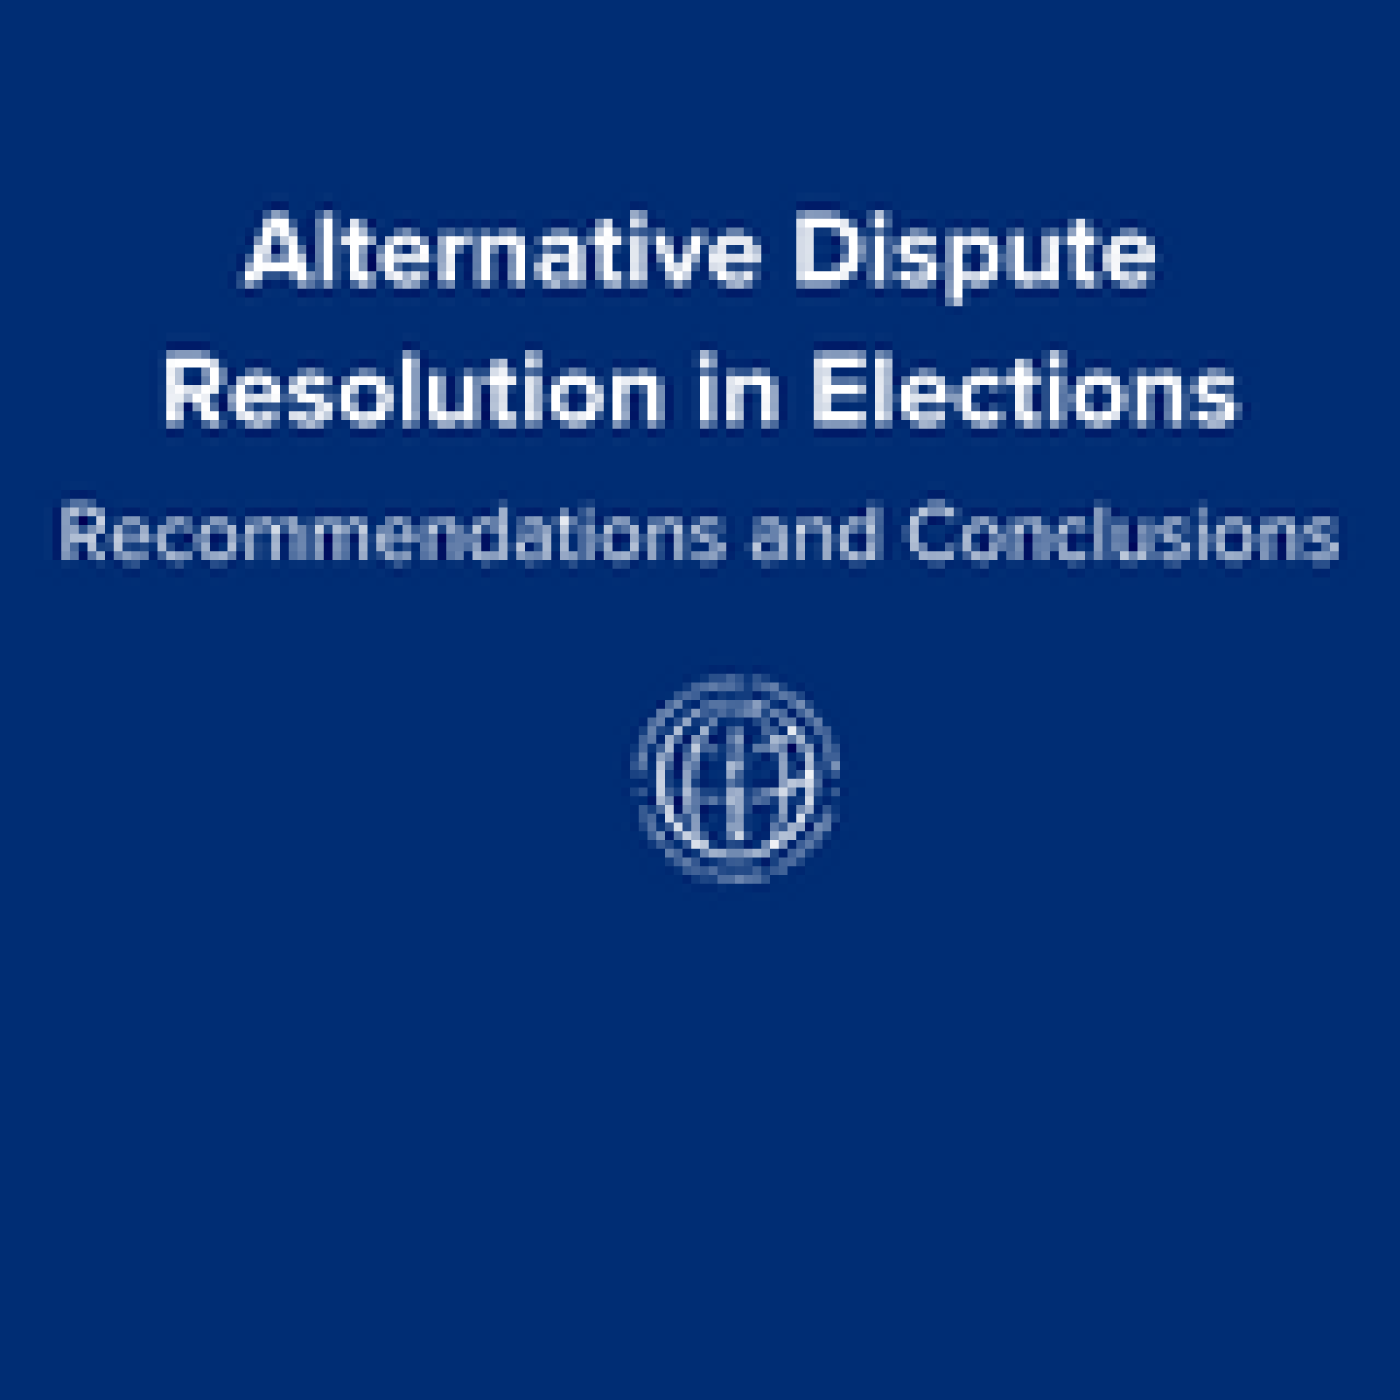 Alternative Dispute Resolution Practitioner Brief Recommendations and Conclusions